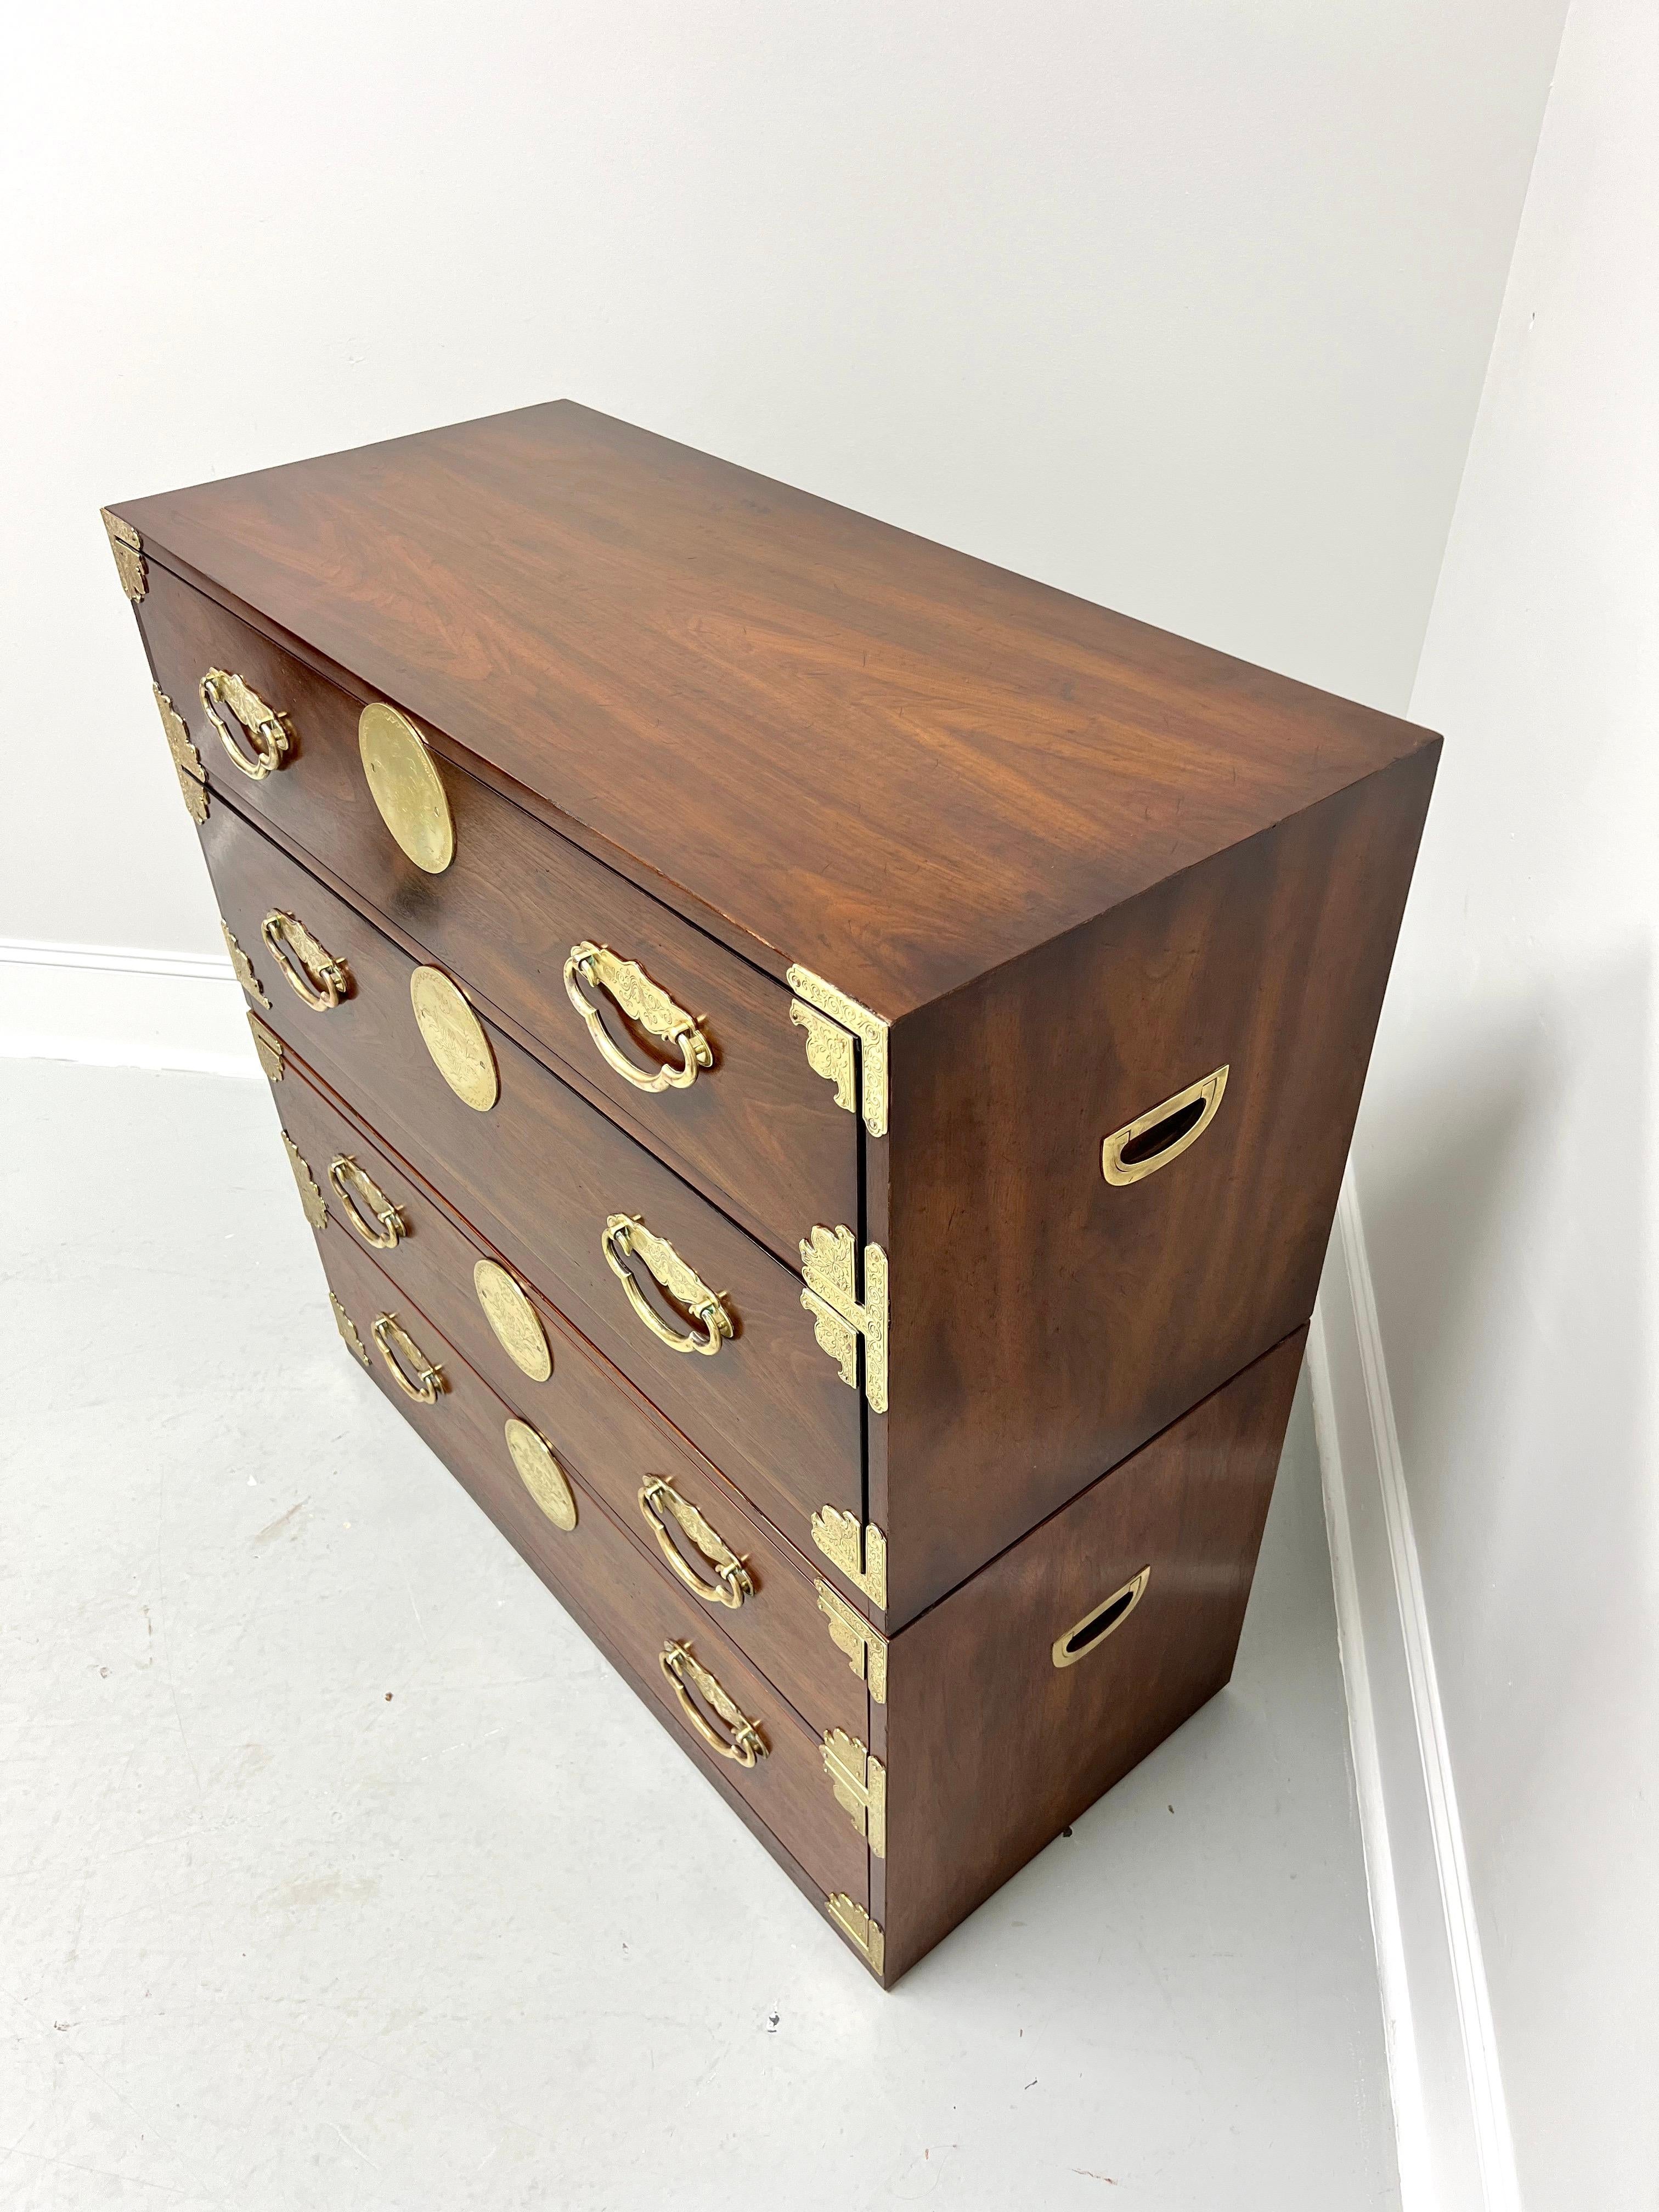 HENREDON Asian Japanese Tansu Campaign Style Modular Stackable Chests - Pair A In Good Condition For Sale In Charlotte, NC